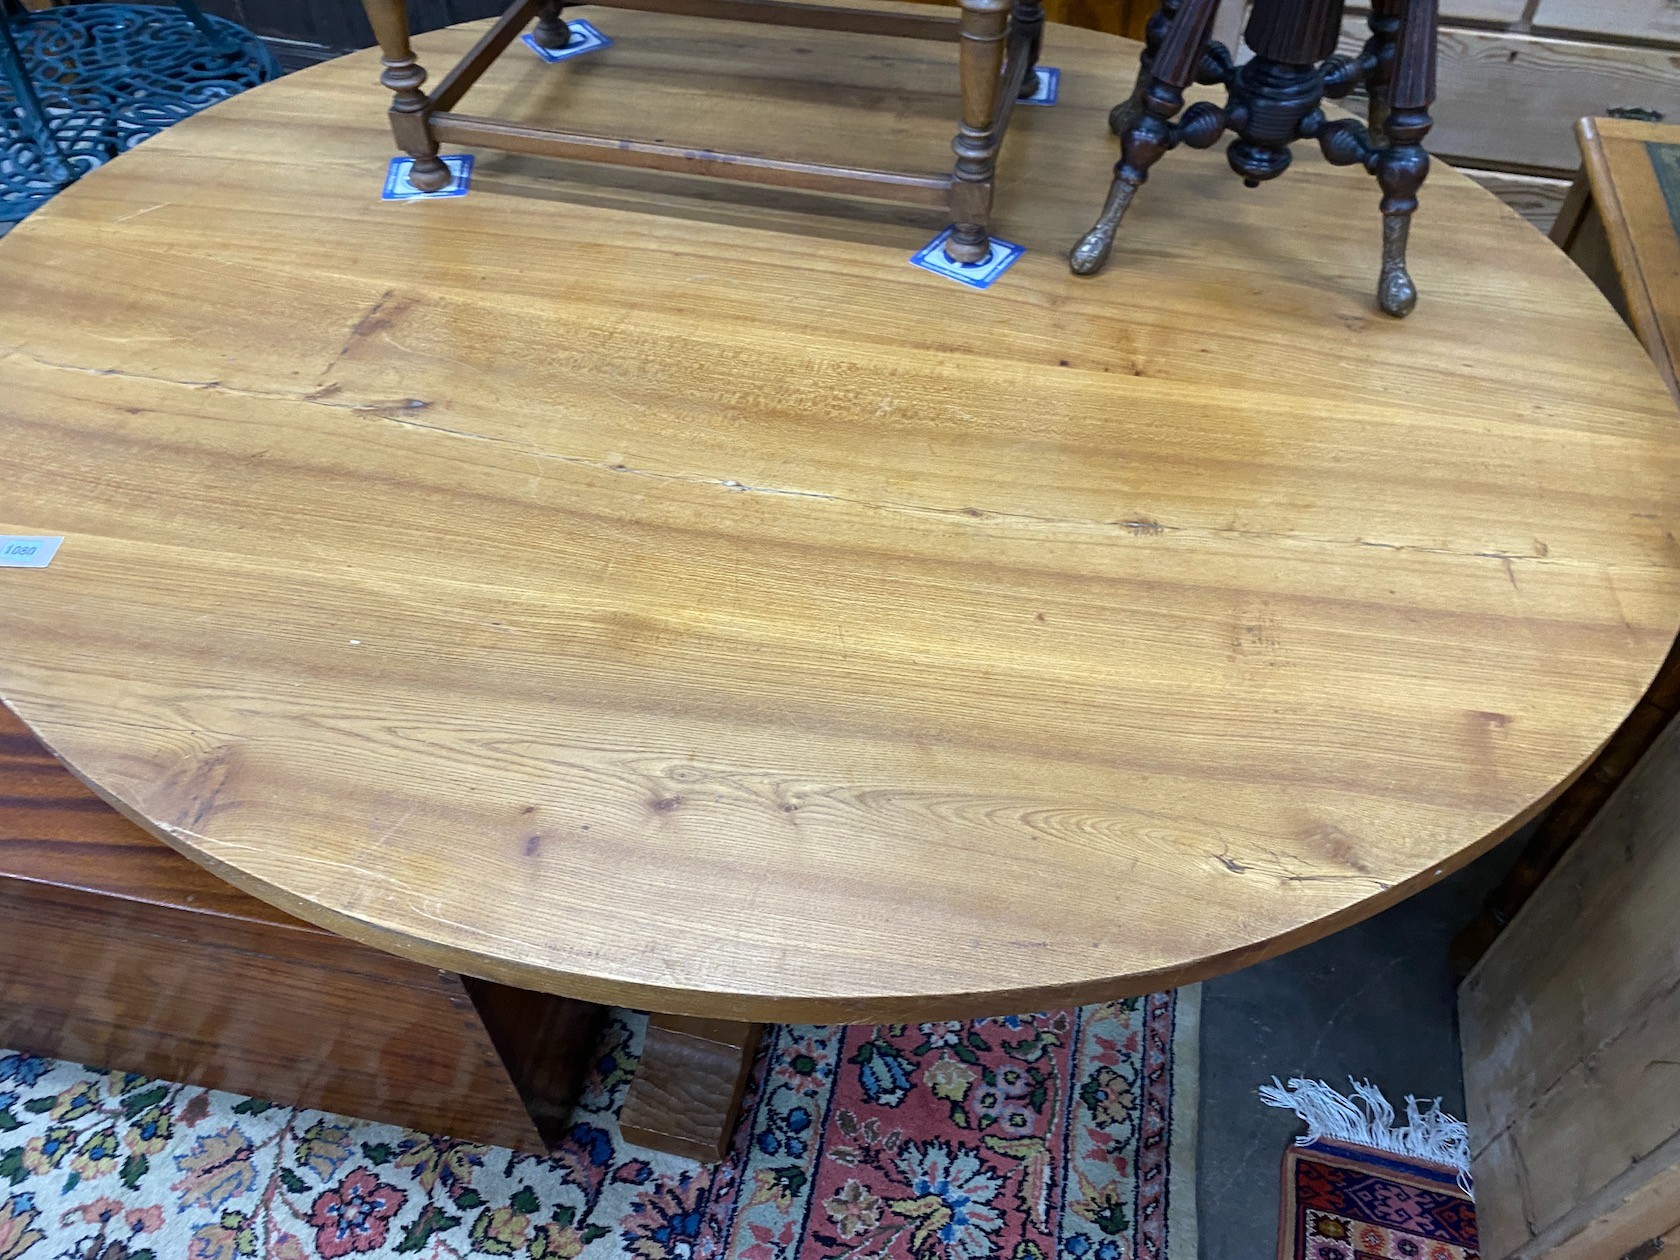 A 'Woodpecker Man' adzed oak dining table, with oval top and chip carved underframe, 170cm x 146cm